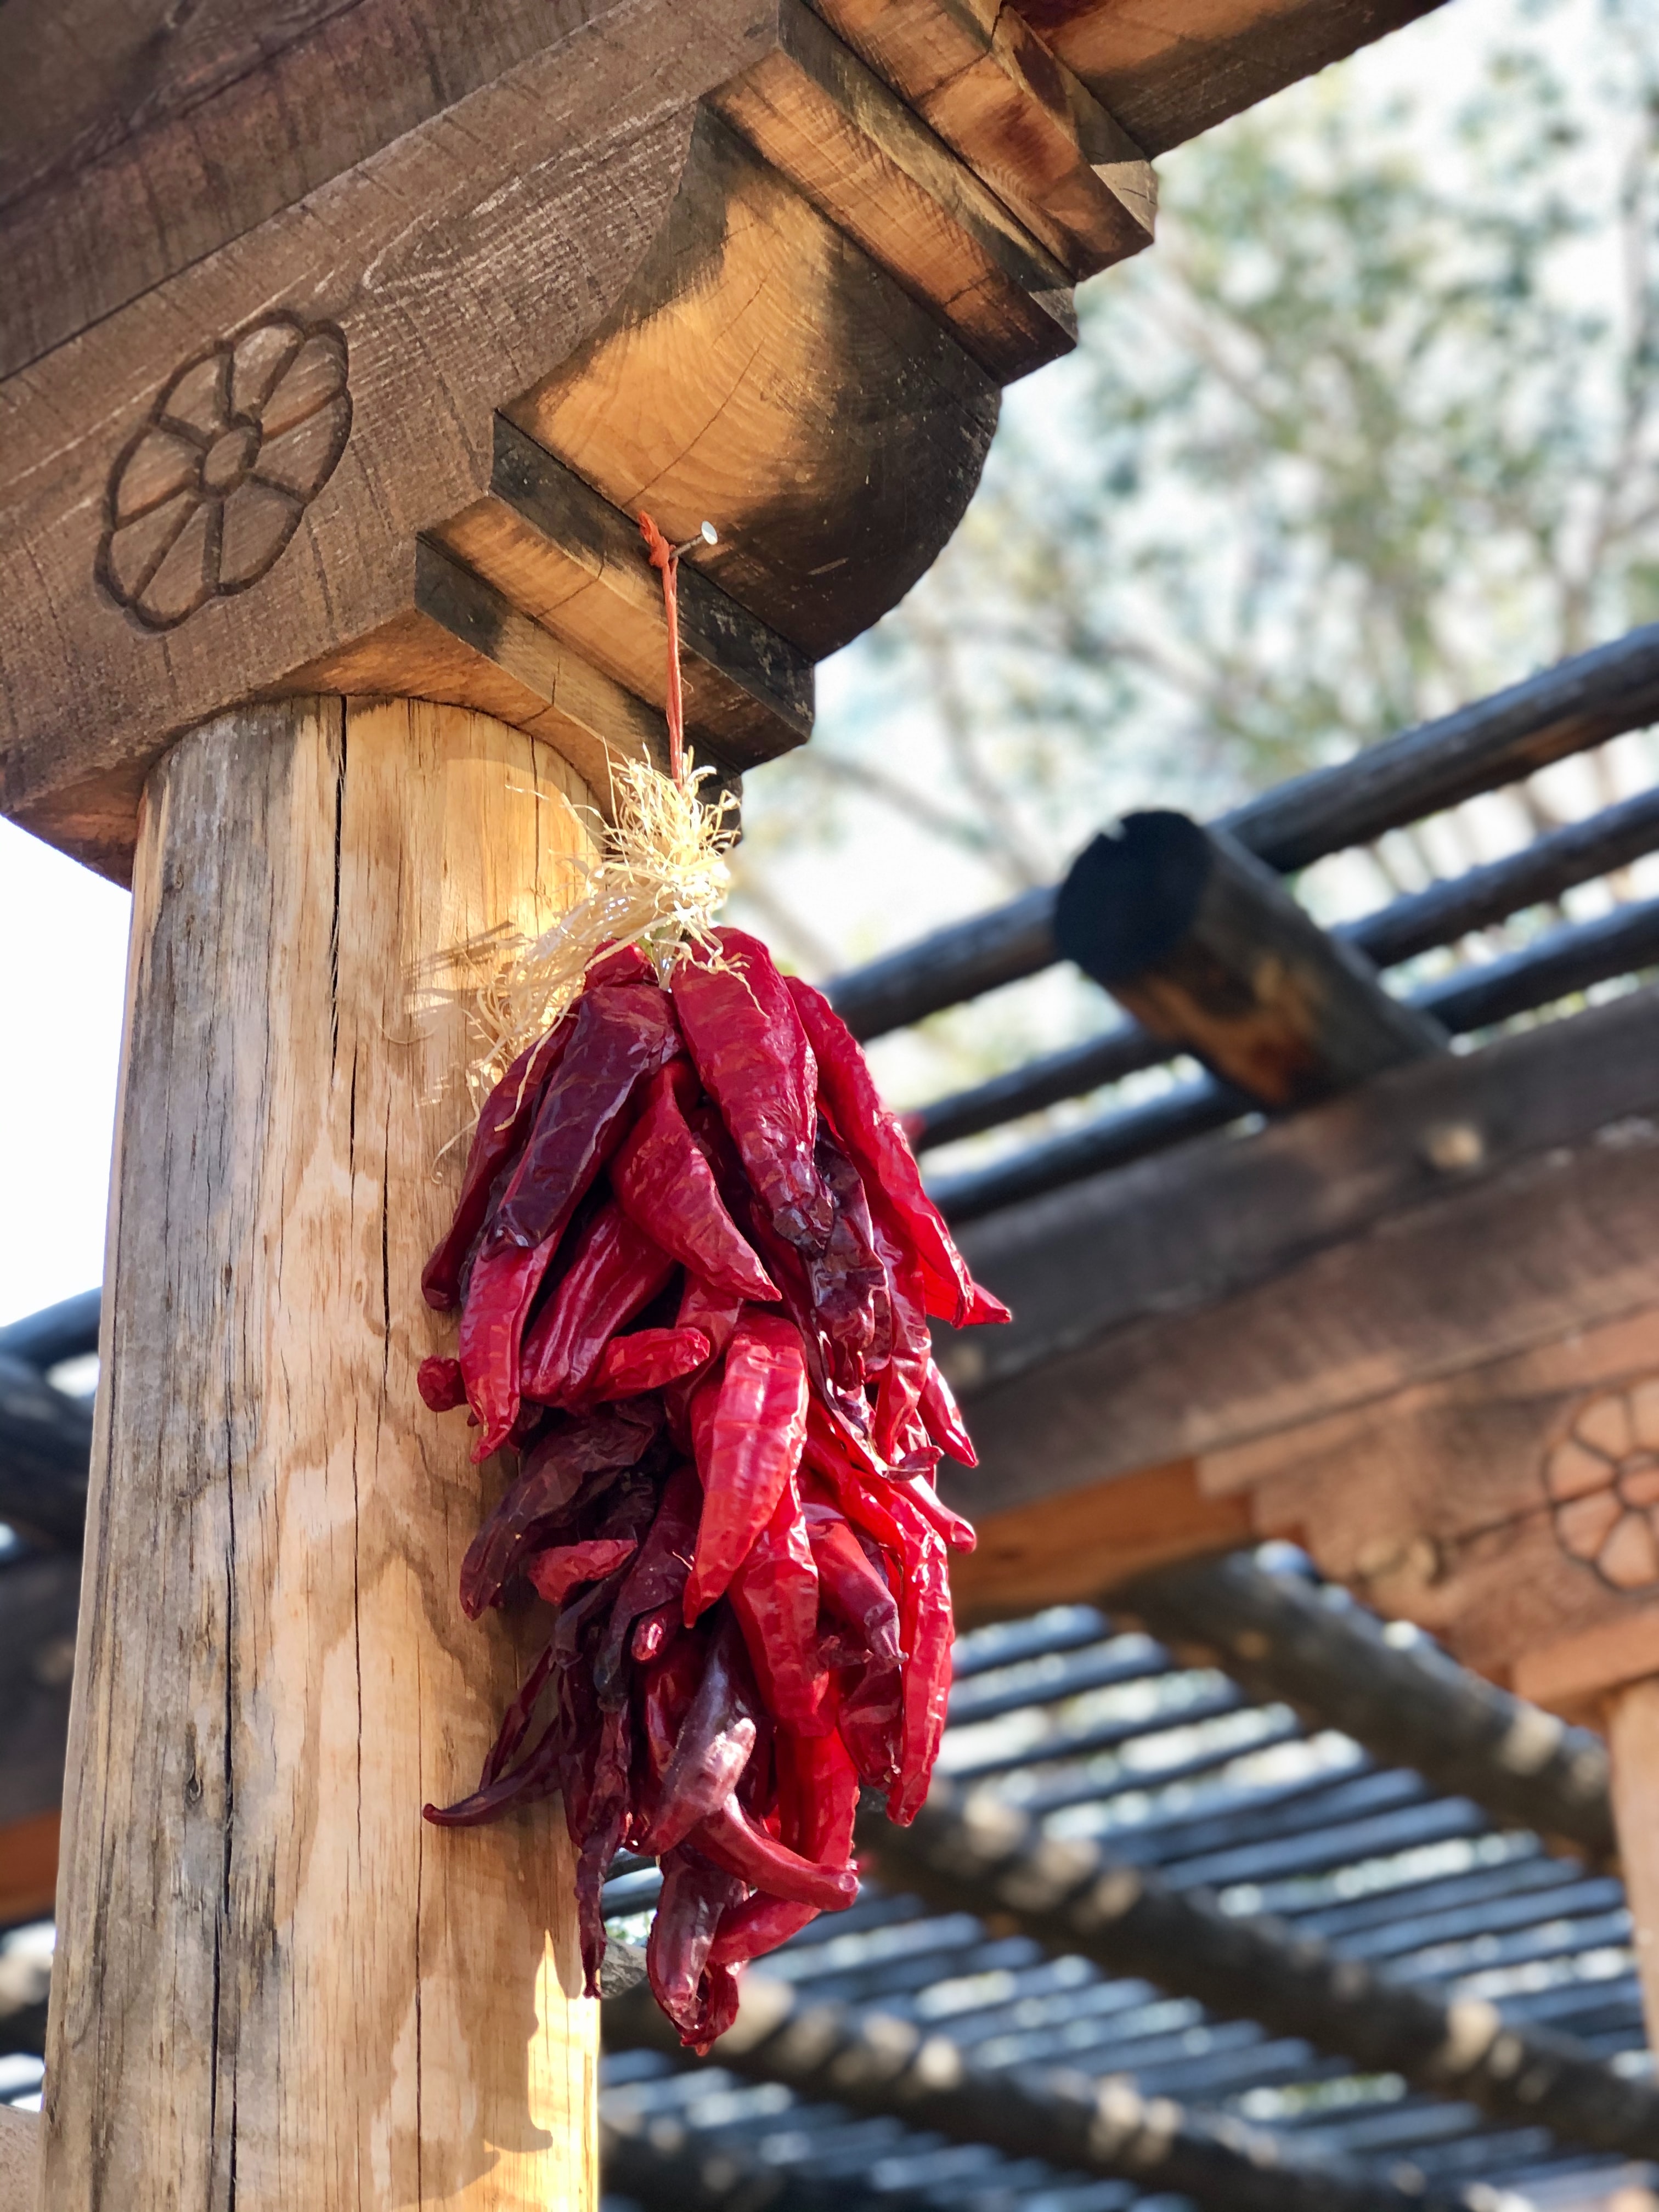 A bunch of red dried chili peppers hanging upside down tied to a rustic wood pillar.